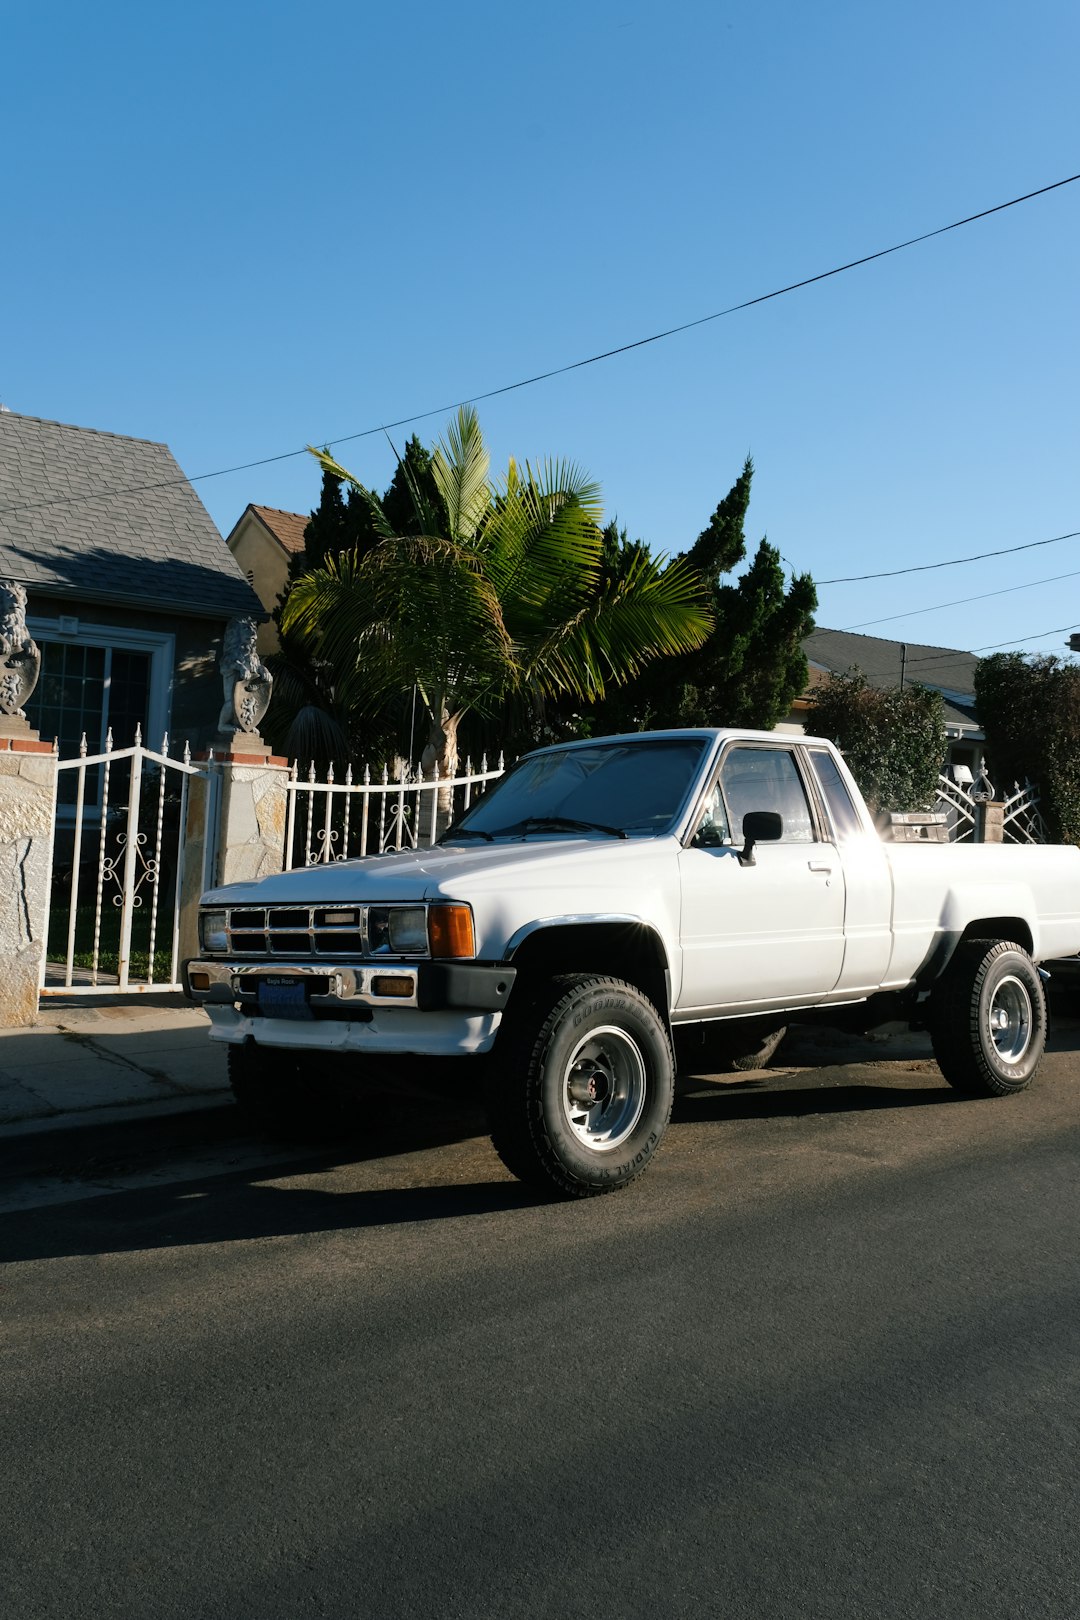 white chevrolet single cab pickup truck on road during daytime